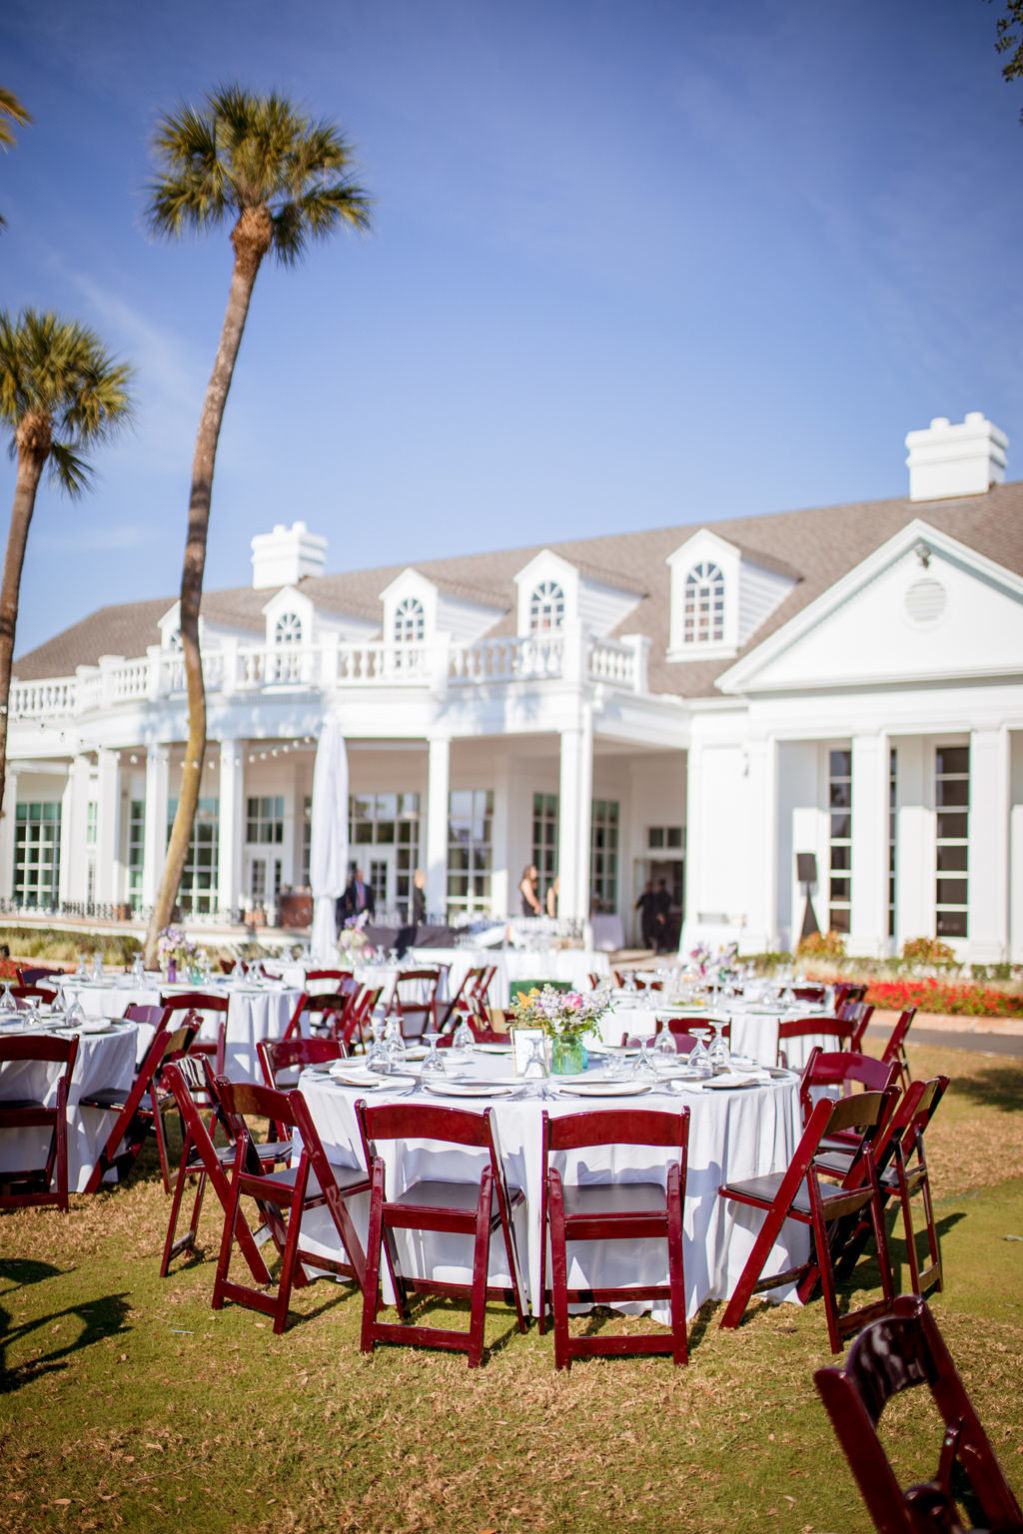 Rustic Southern Chic Garden Wedding Decor in Backyard Reception in South Tampa, White Round Tables with Wooden Folding Chairs, Colorful Centerpieces, at Palma Ceia Golf & Country Club | Tampa Bay Wedding Planner Jessie Soplinski with Breezin' Weddings